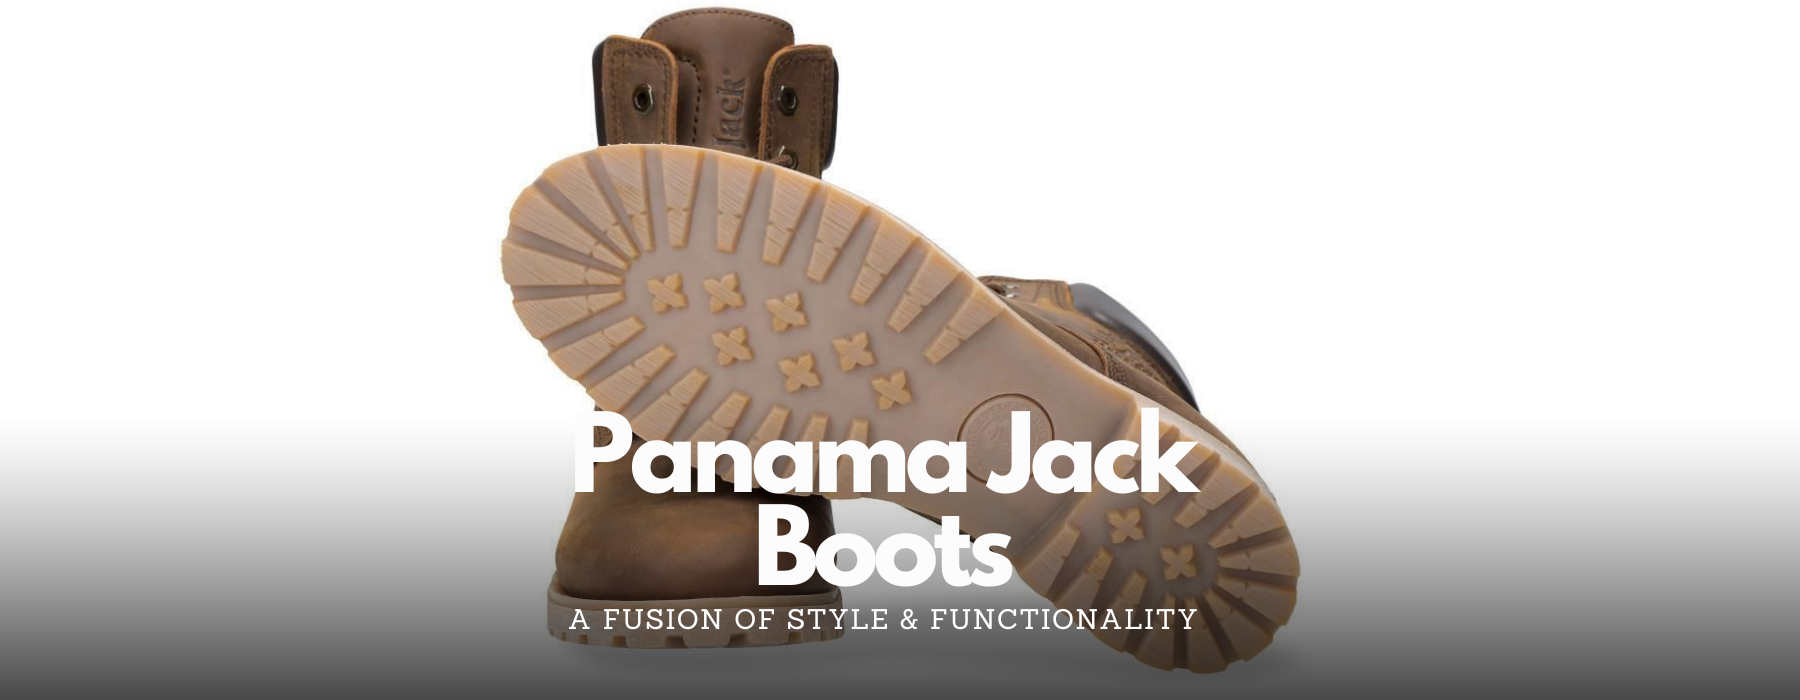 Exploring Panama Jack Boots: A Fusion of Style and Functionality ...